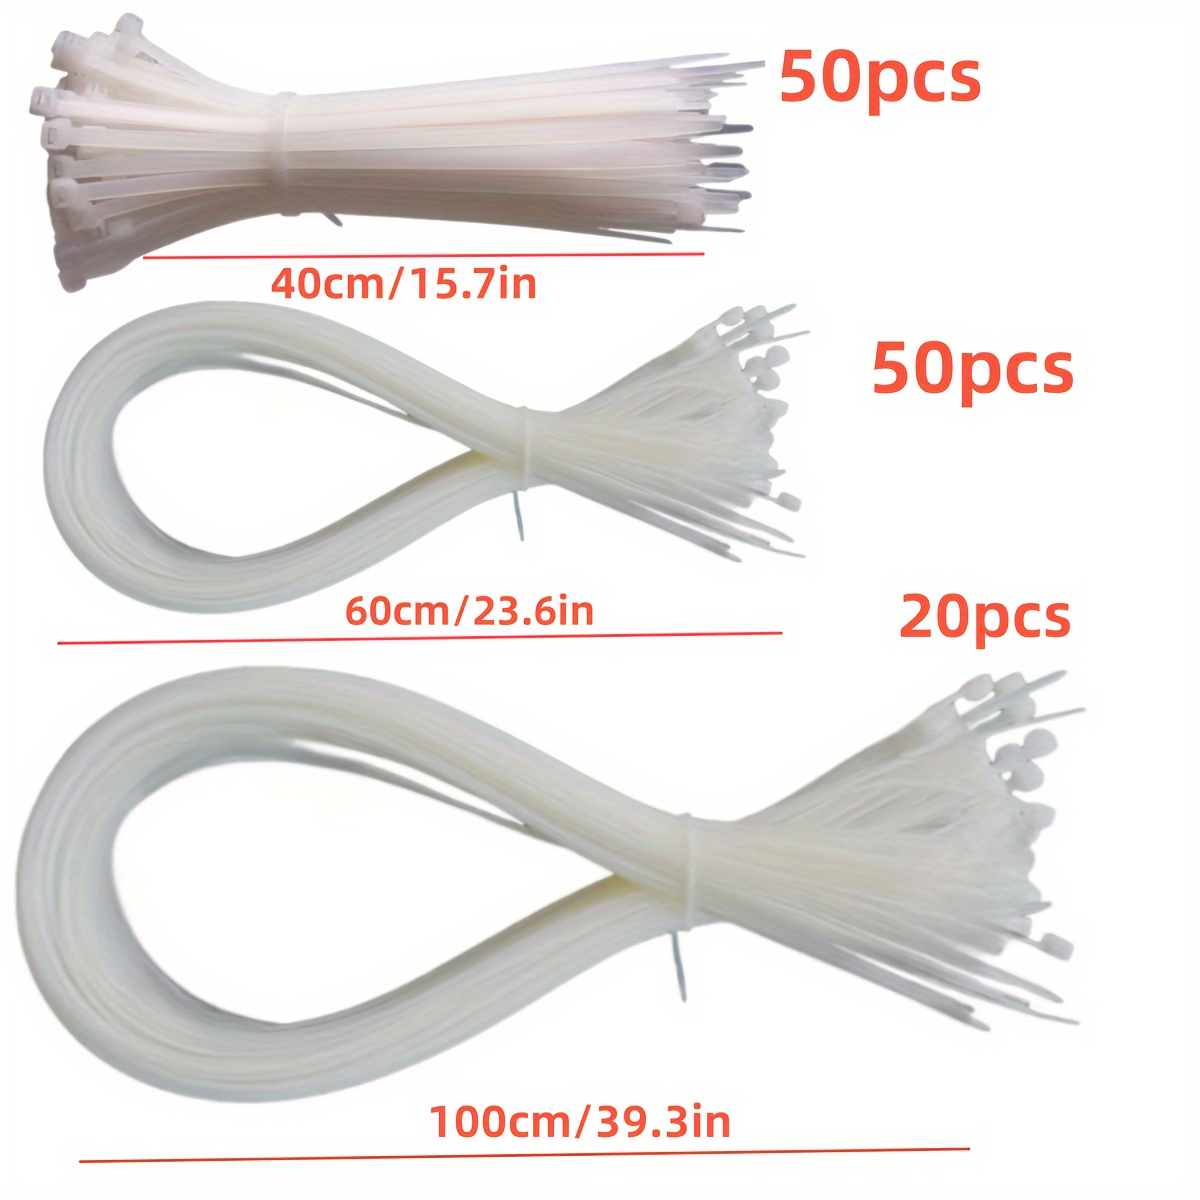 

Multi-purpose "heavy Duty" Nylon Tie - Self-locking, Large Size 400/500/600/800/1000mm, Large Size Tie Plastic Tie Wire Tie New Material Tie Wire Tie, For And Organization In Home And Office